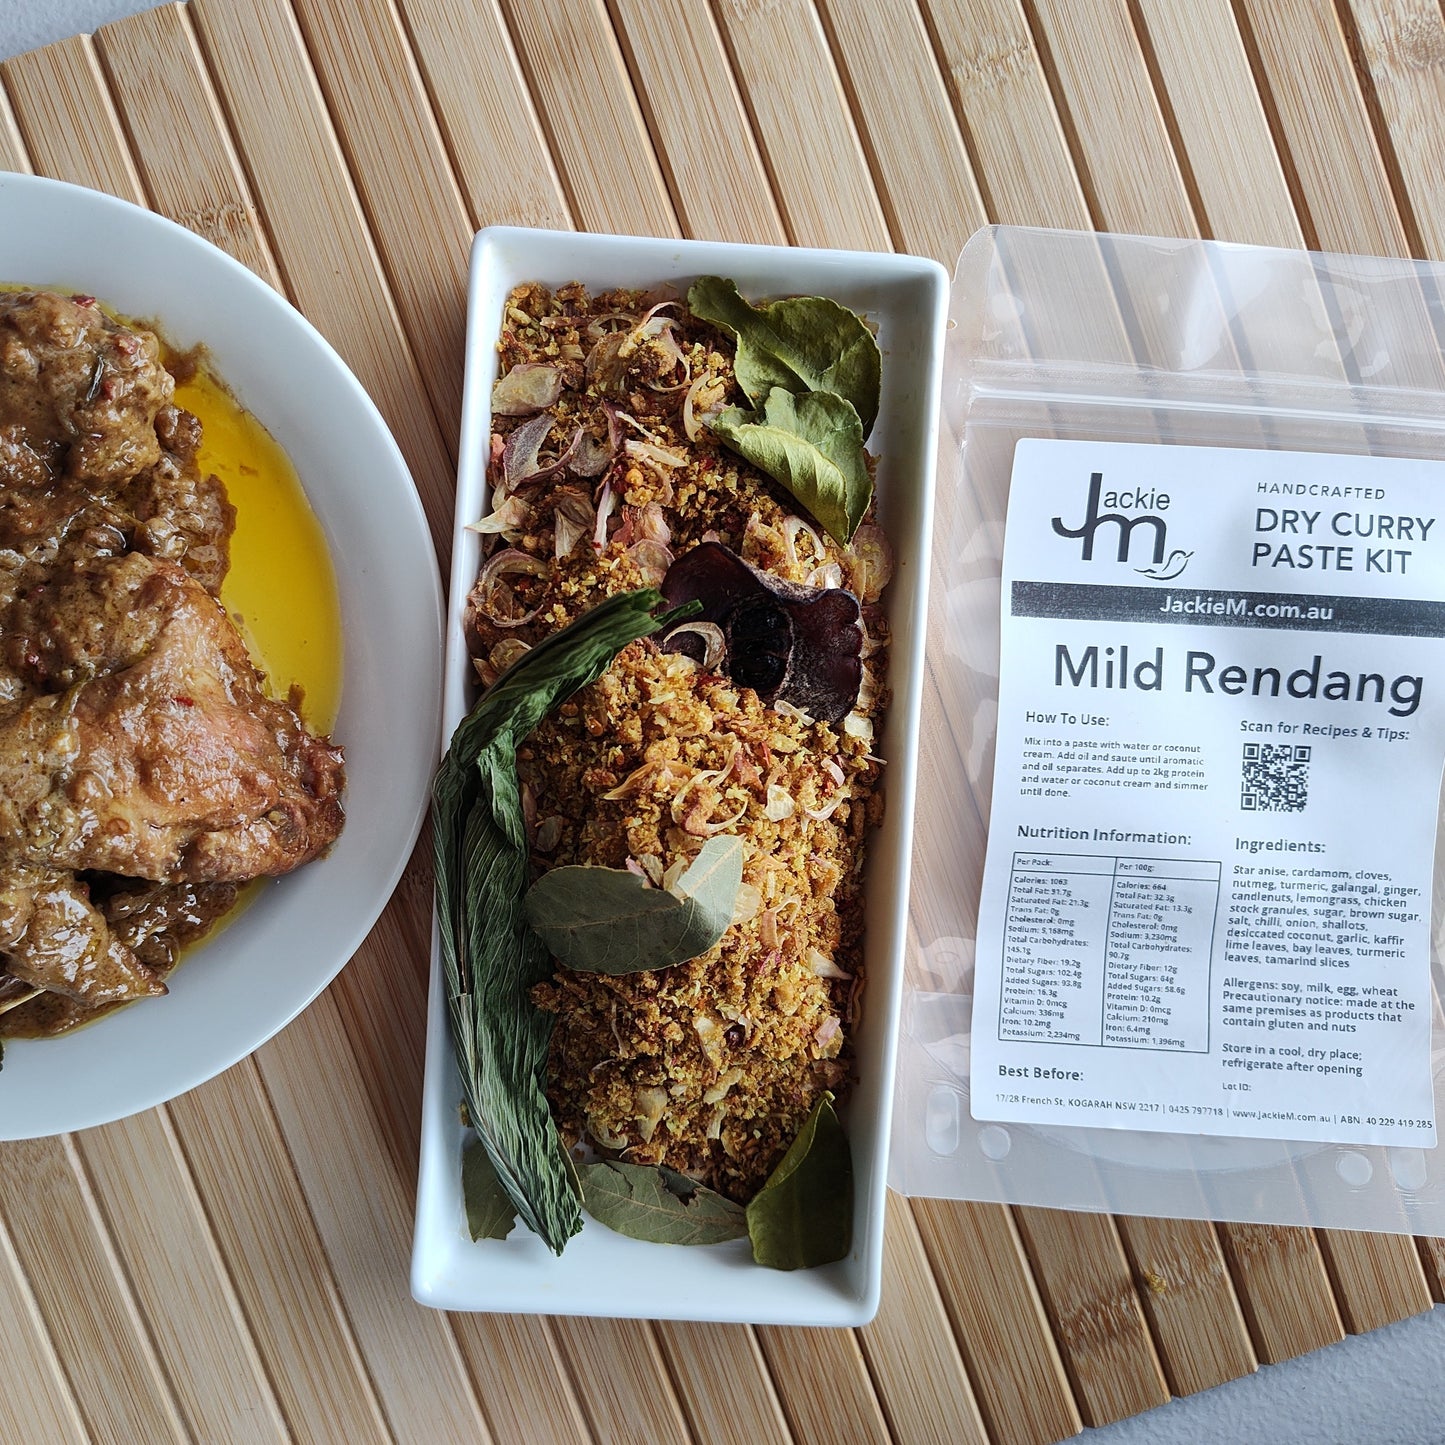 Handcrafted - Mild Rendang Dry Curry Paste Kit